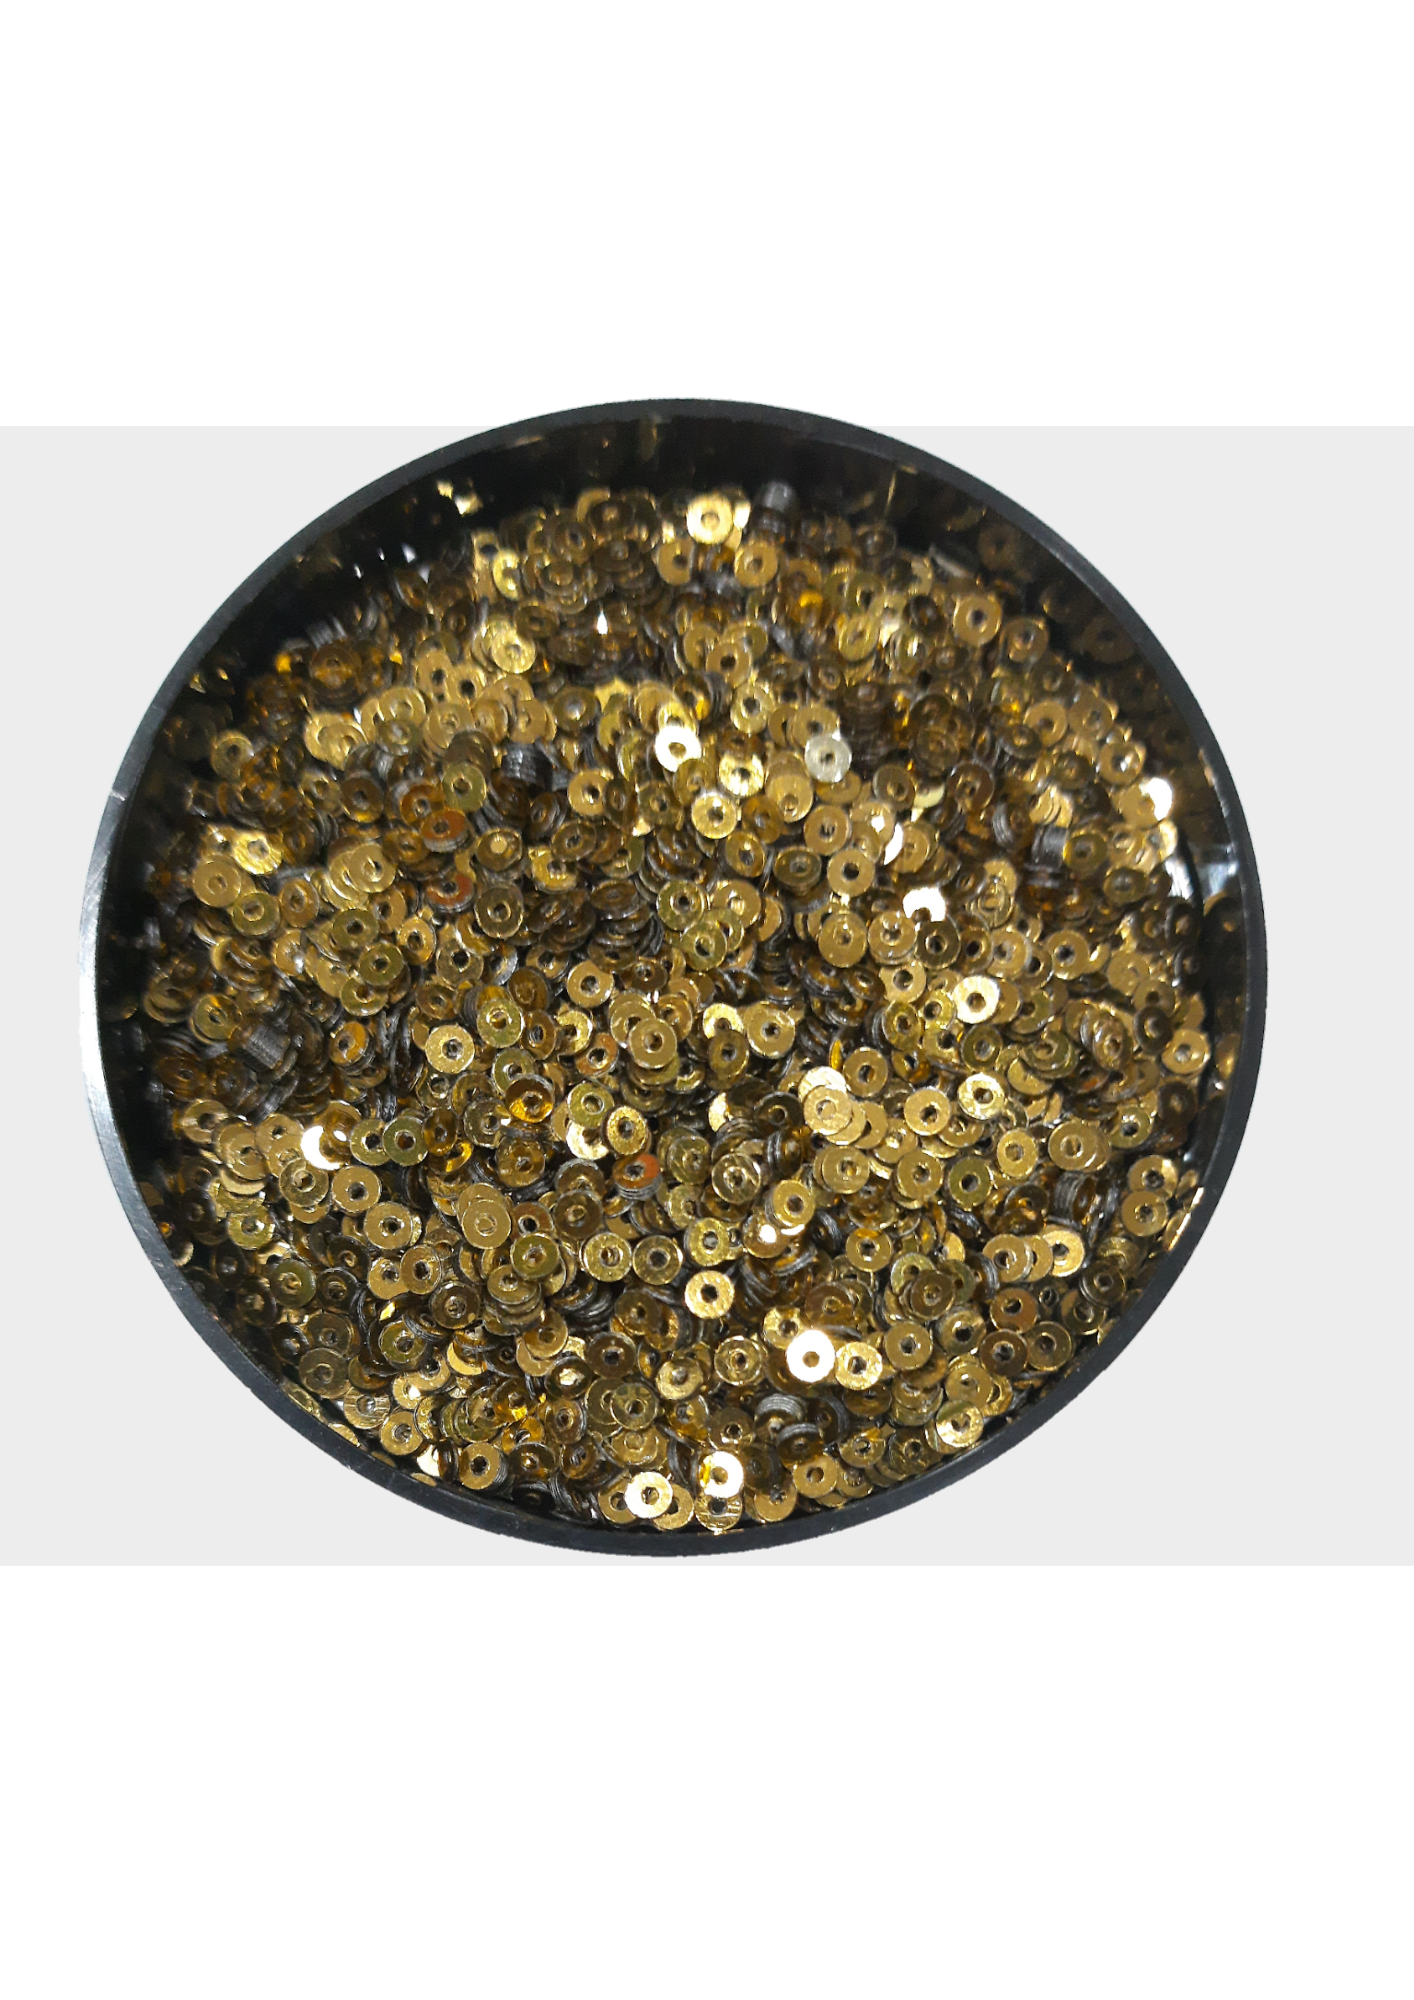 Sequins - Antic gold 3mm